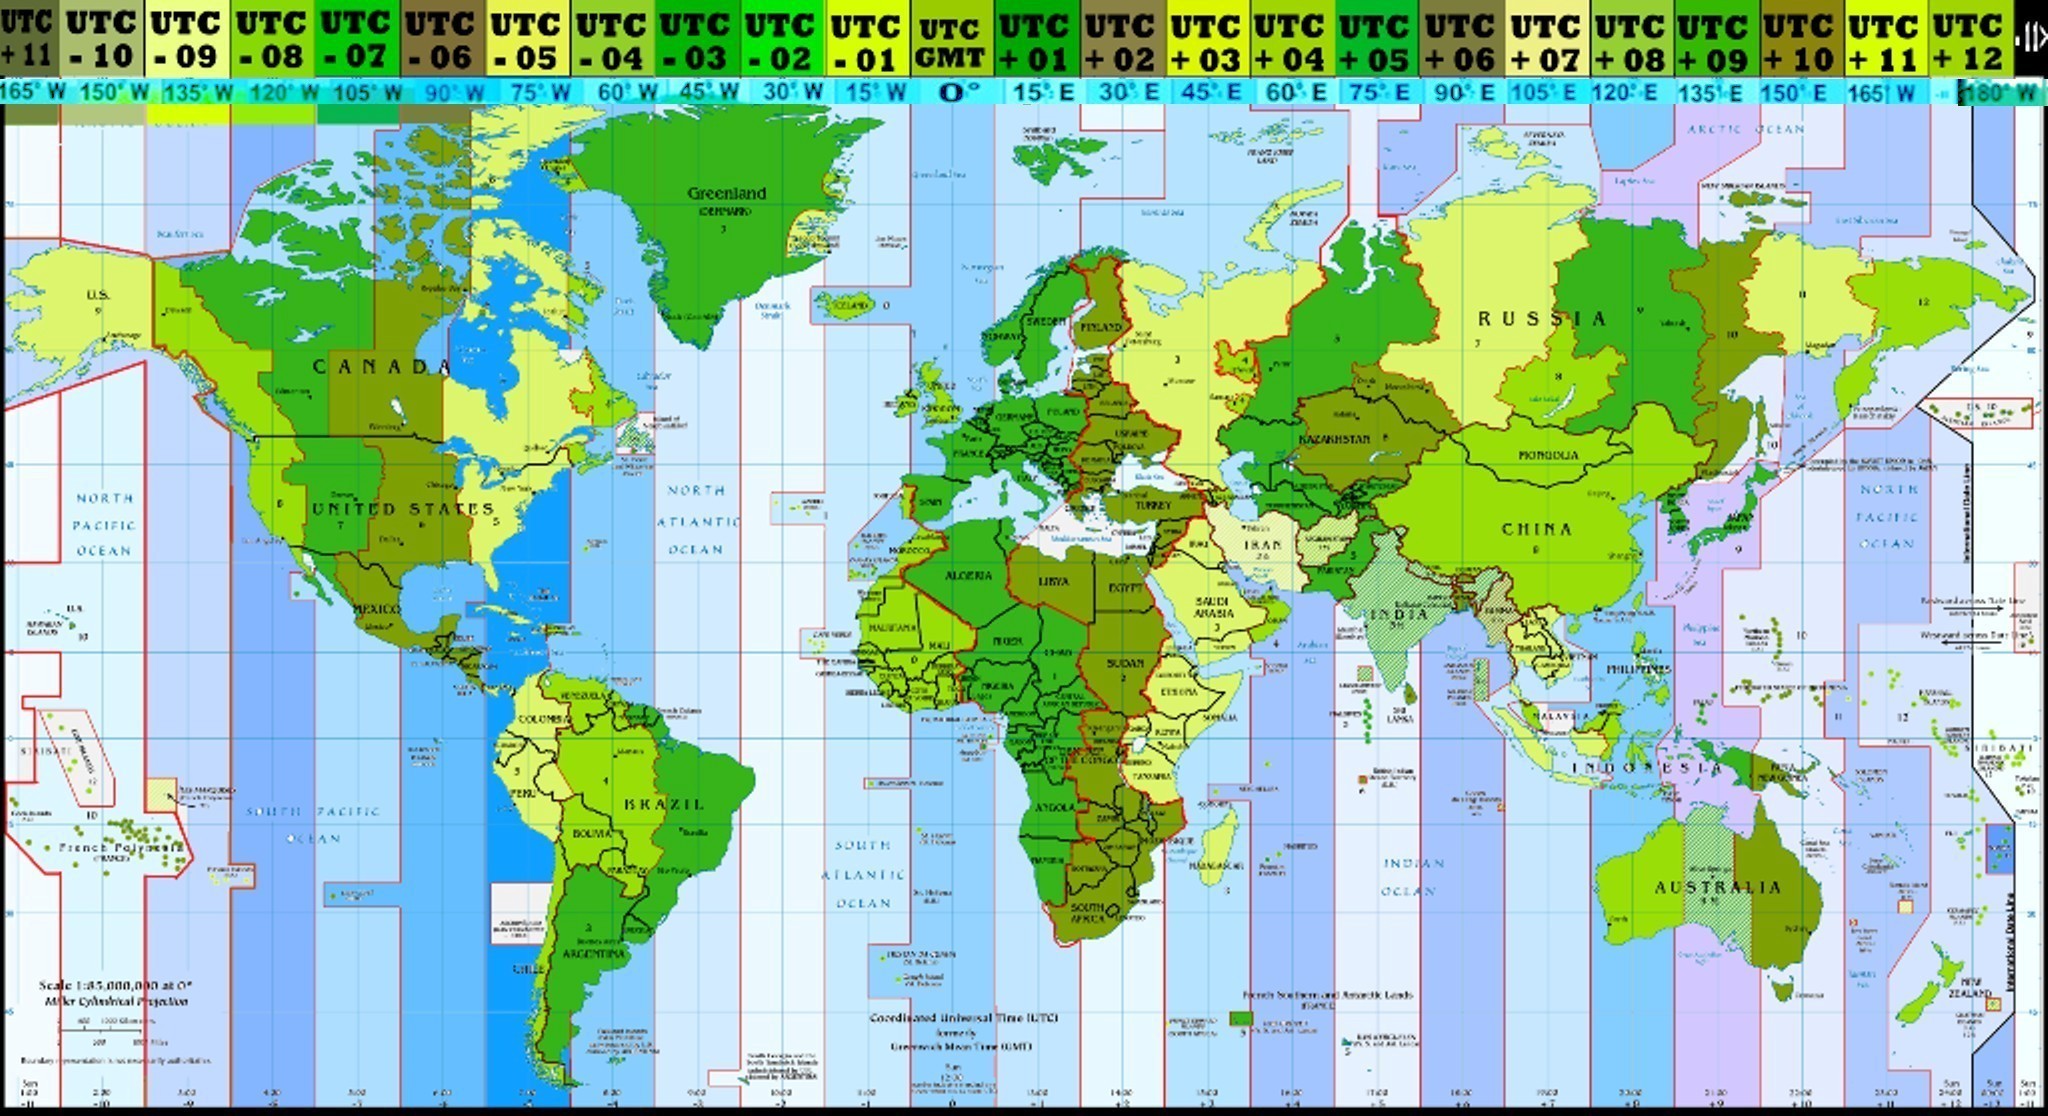 2048x1116 United-states-time-zone-map.gif New Us Timezone Map with